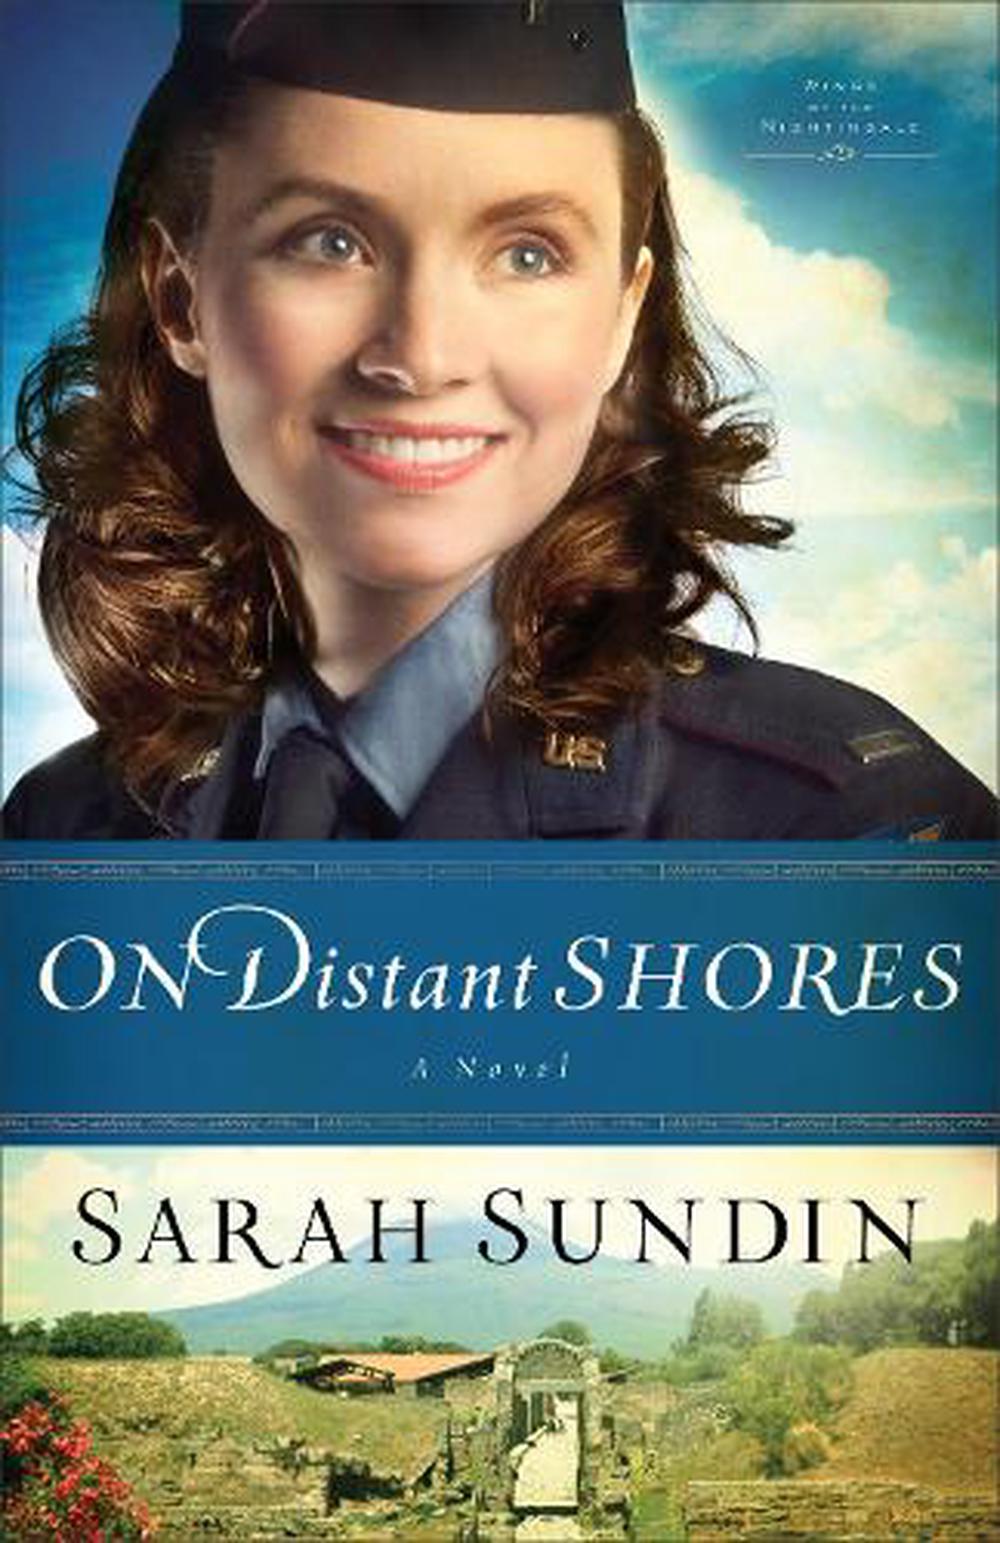 9780800720827　Distant　On　Paperback,　The　at　Sundin,　online　A　Shores　Buy　Novel　Sarah　by　–　Nile